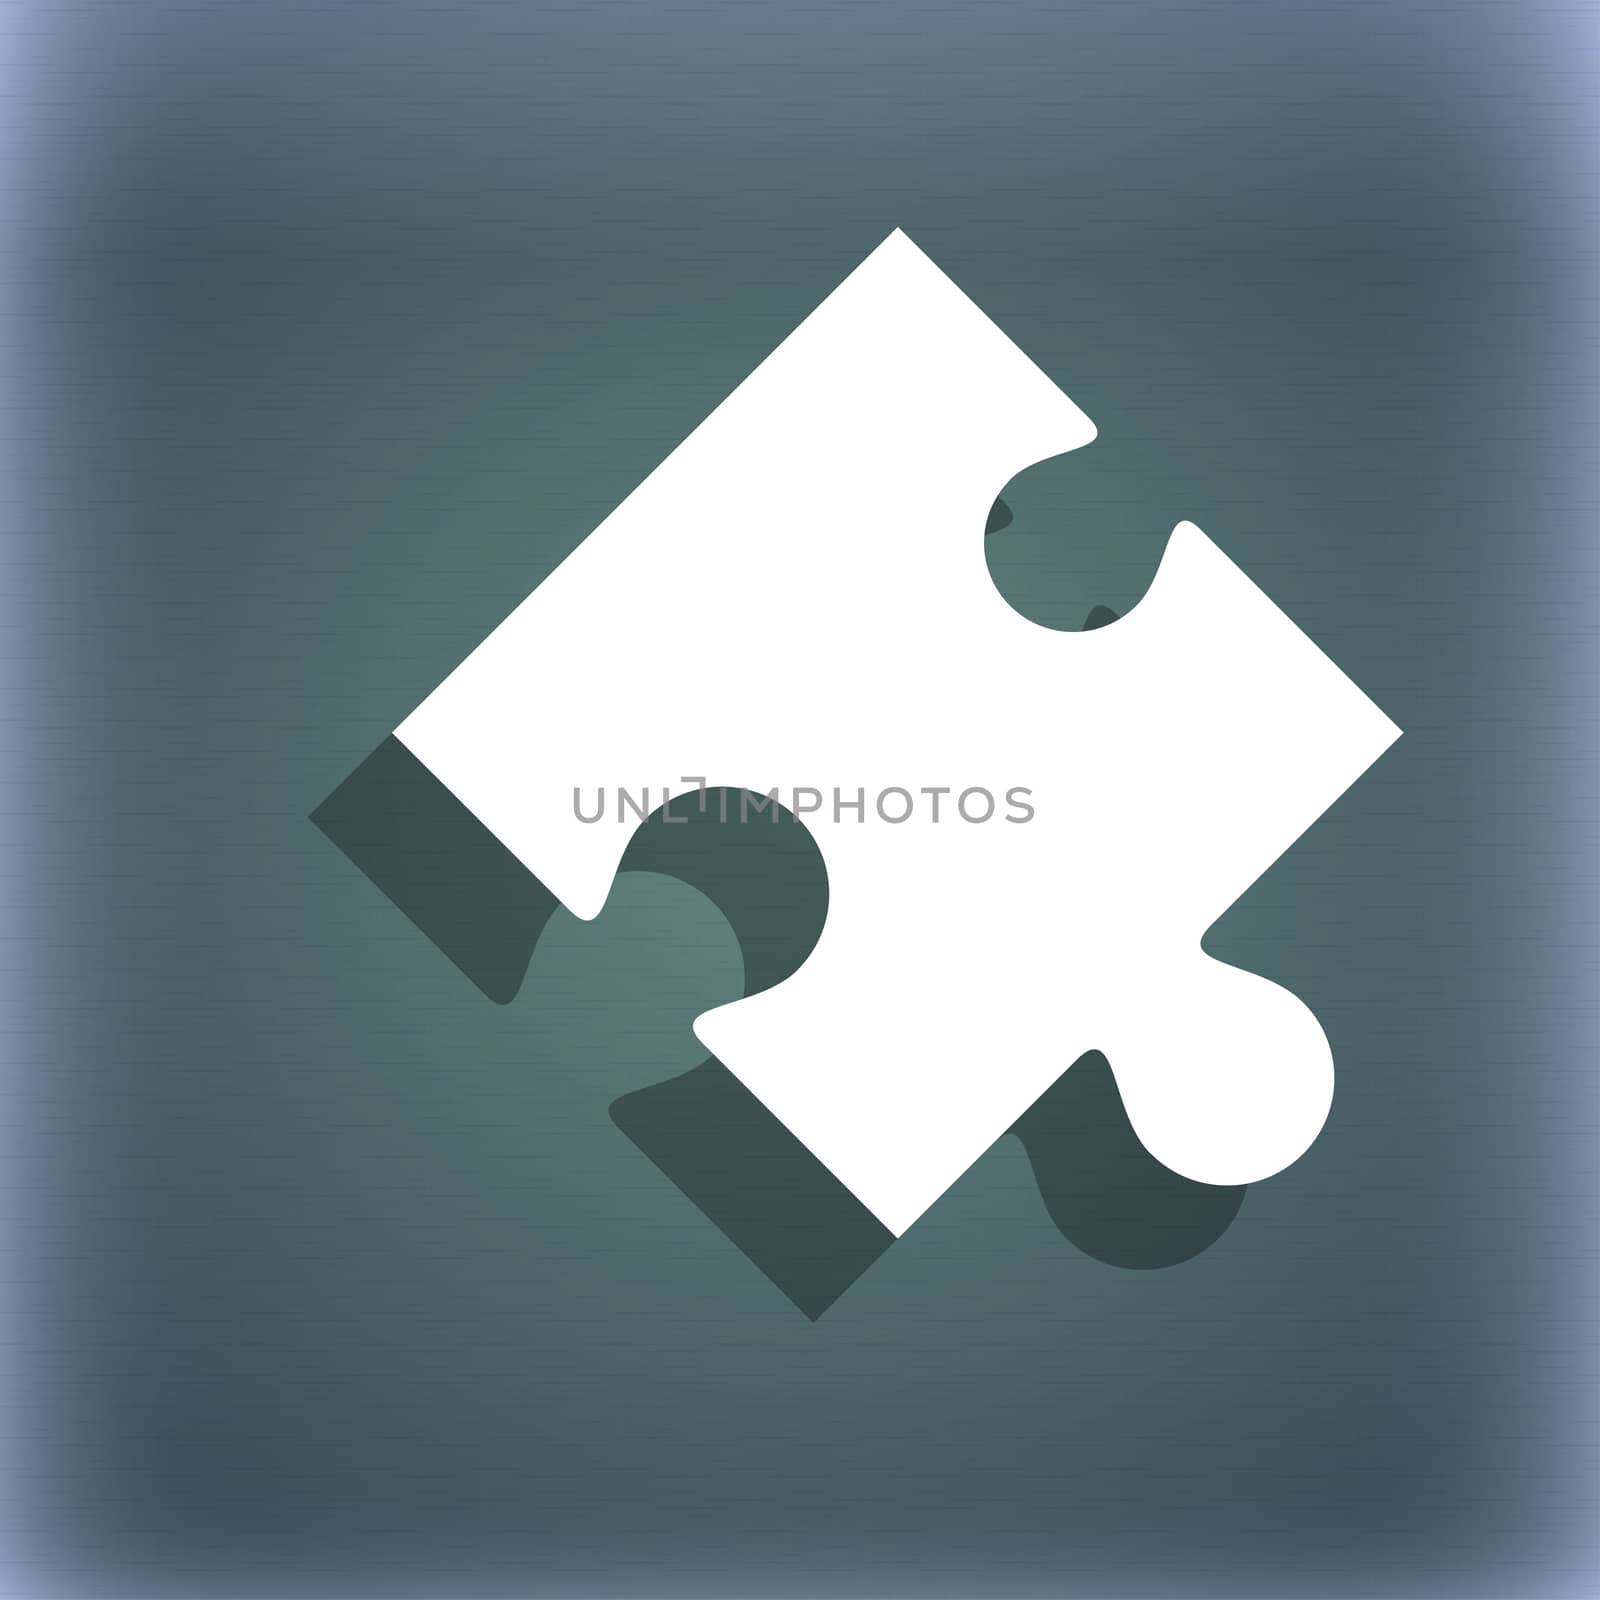 Puzzle piece icon sign. On the blue-green abstract background with shadow and space for your text. illustration